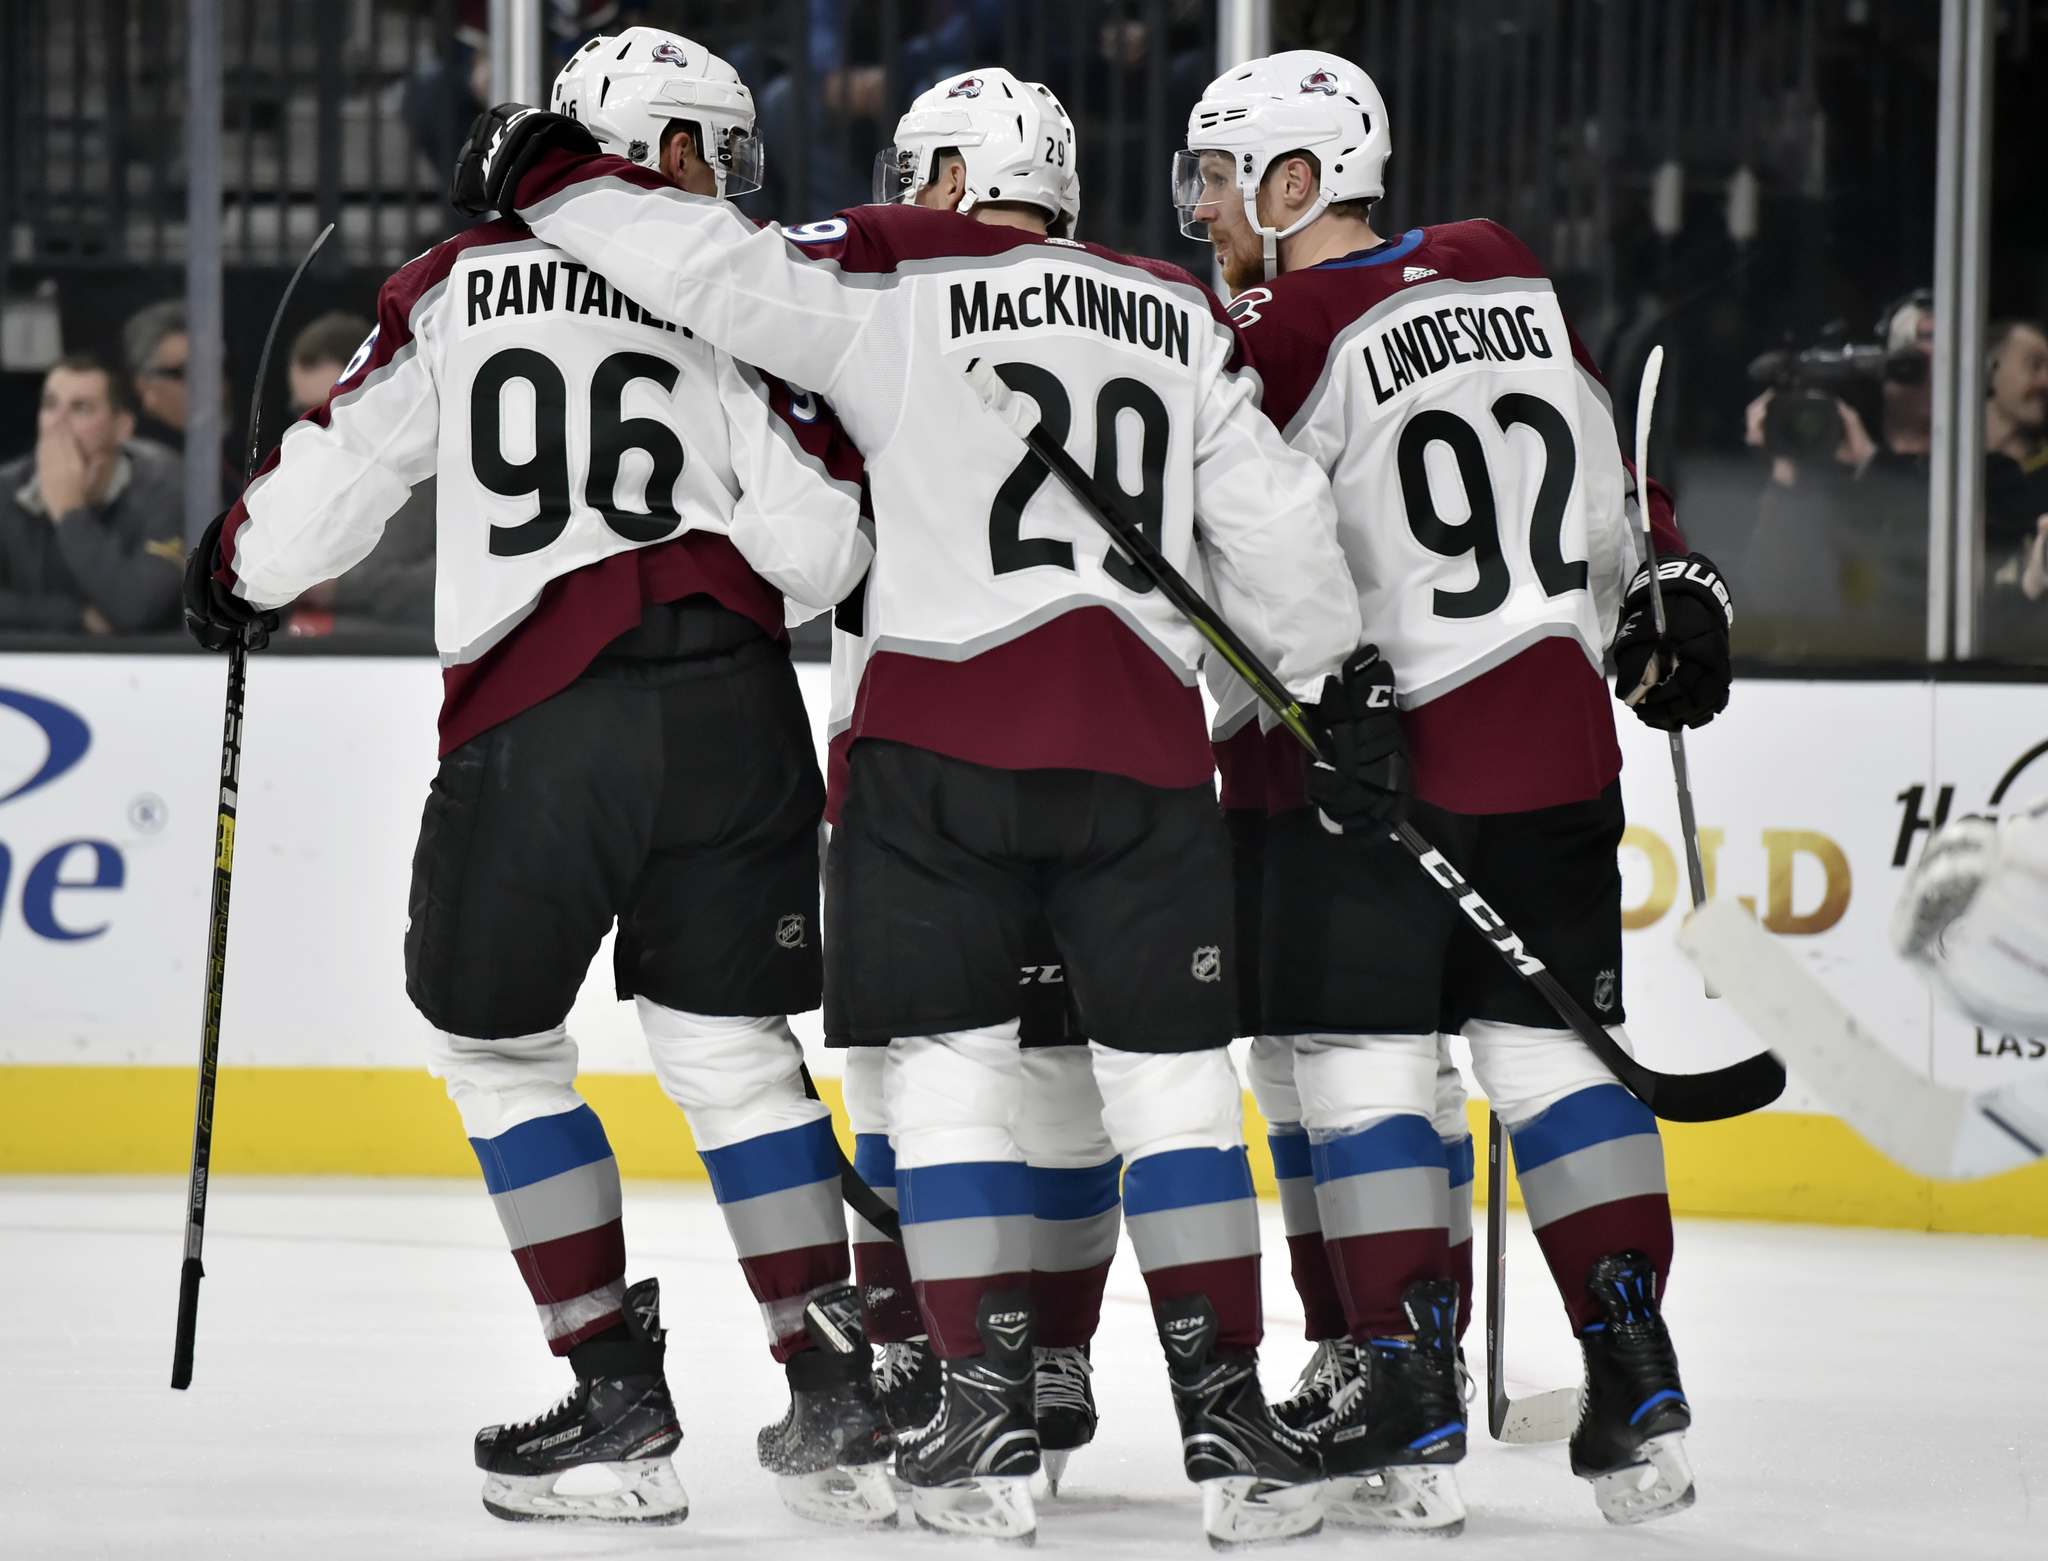 Jets Have To Shut Down High Flying Line Or Risk Triggering Avalanche